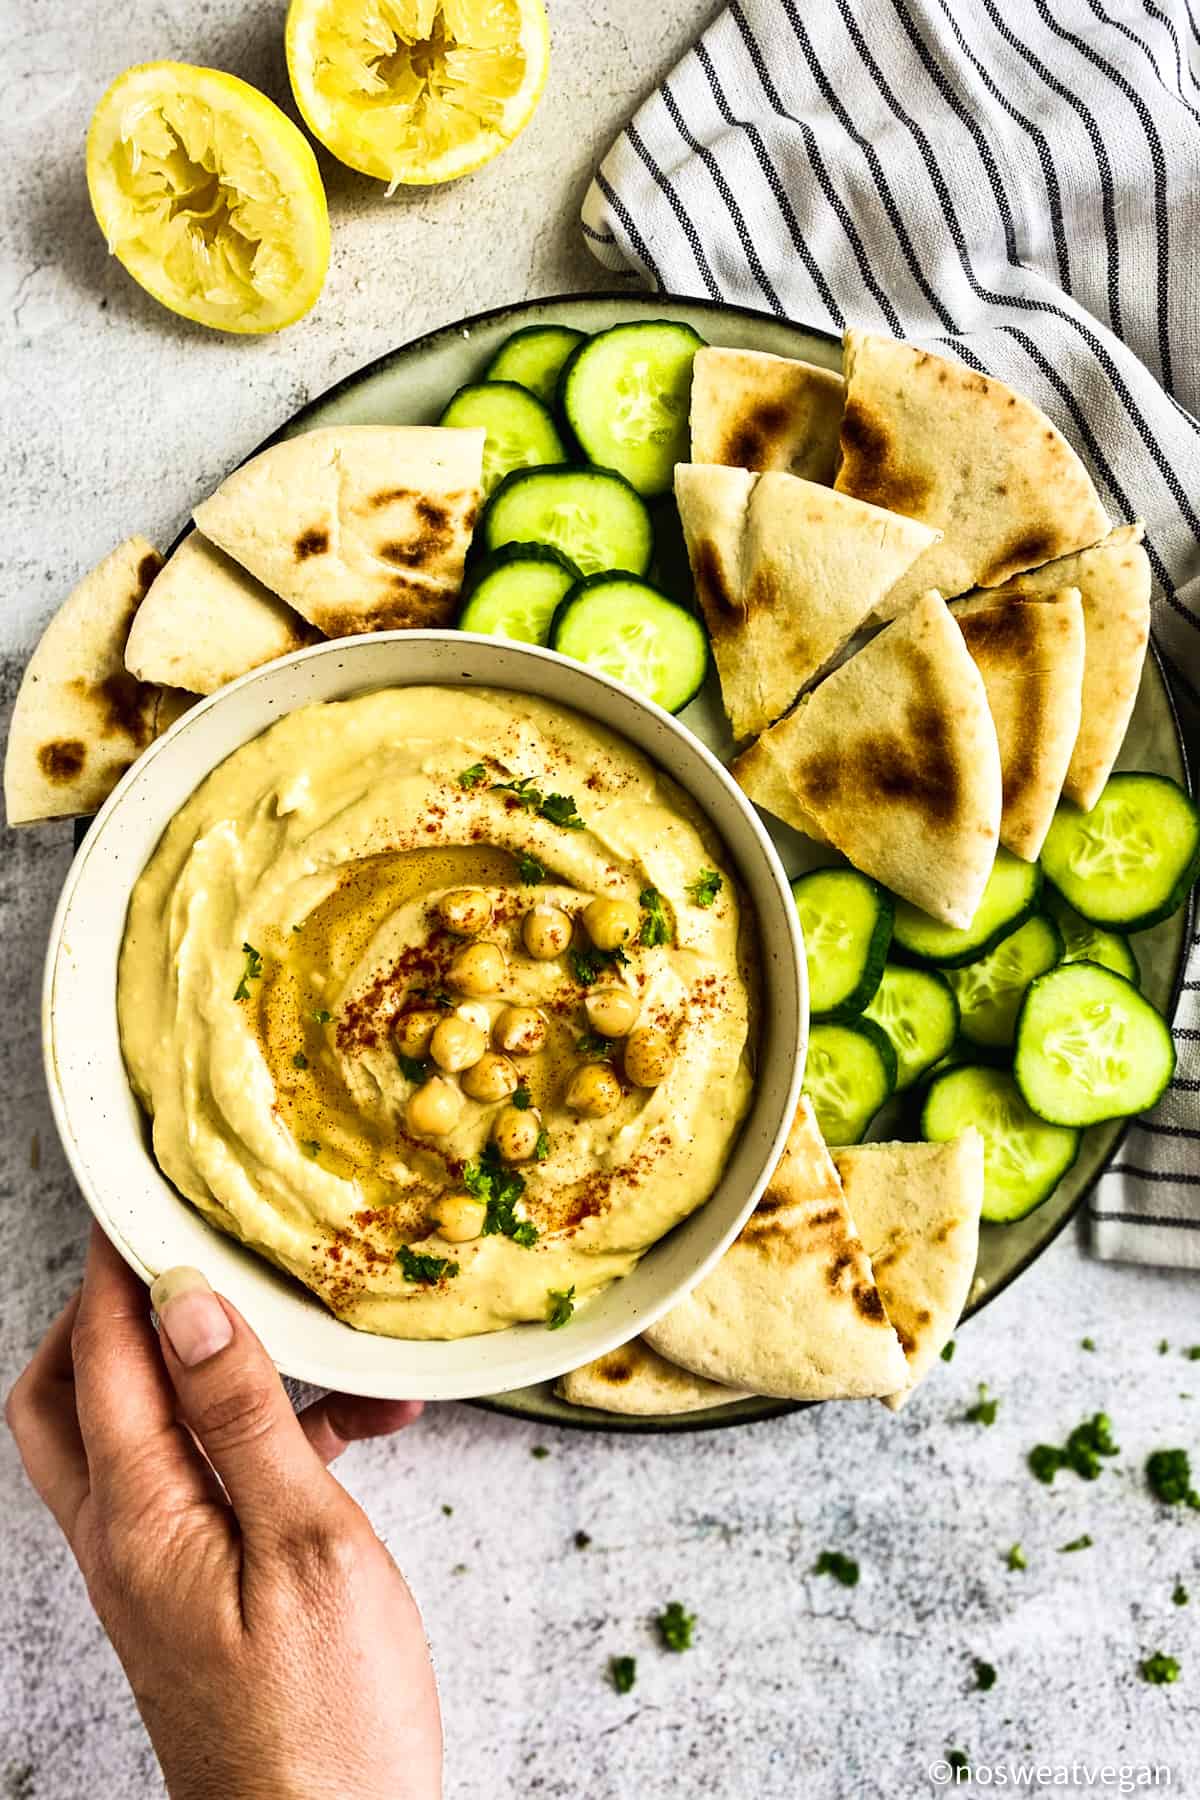 Hummus made without oil on a place with pita triangles and cucumbers.